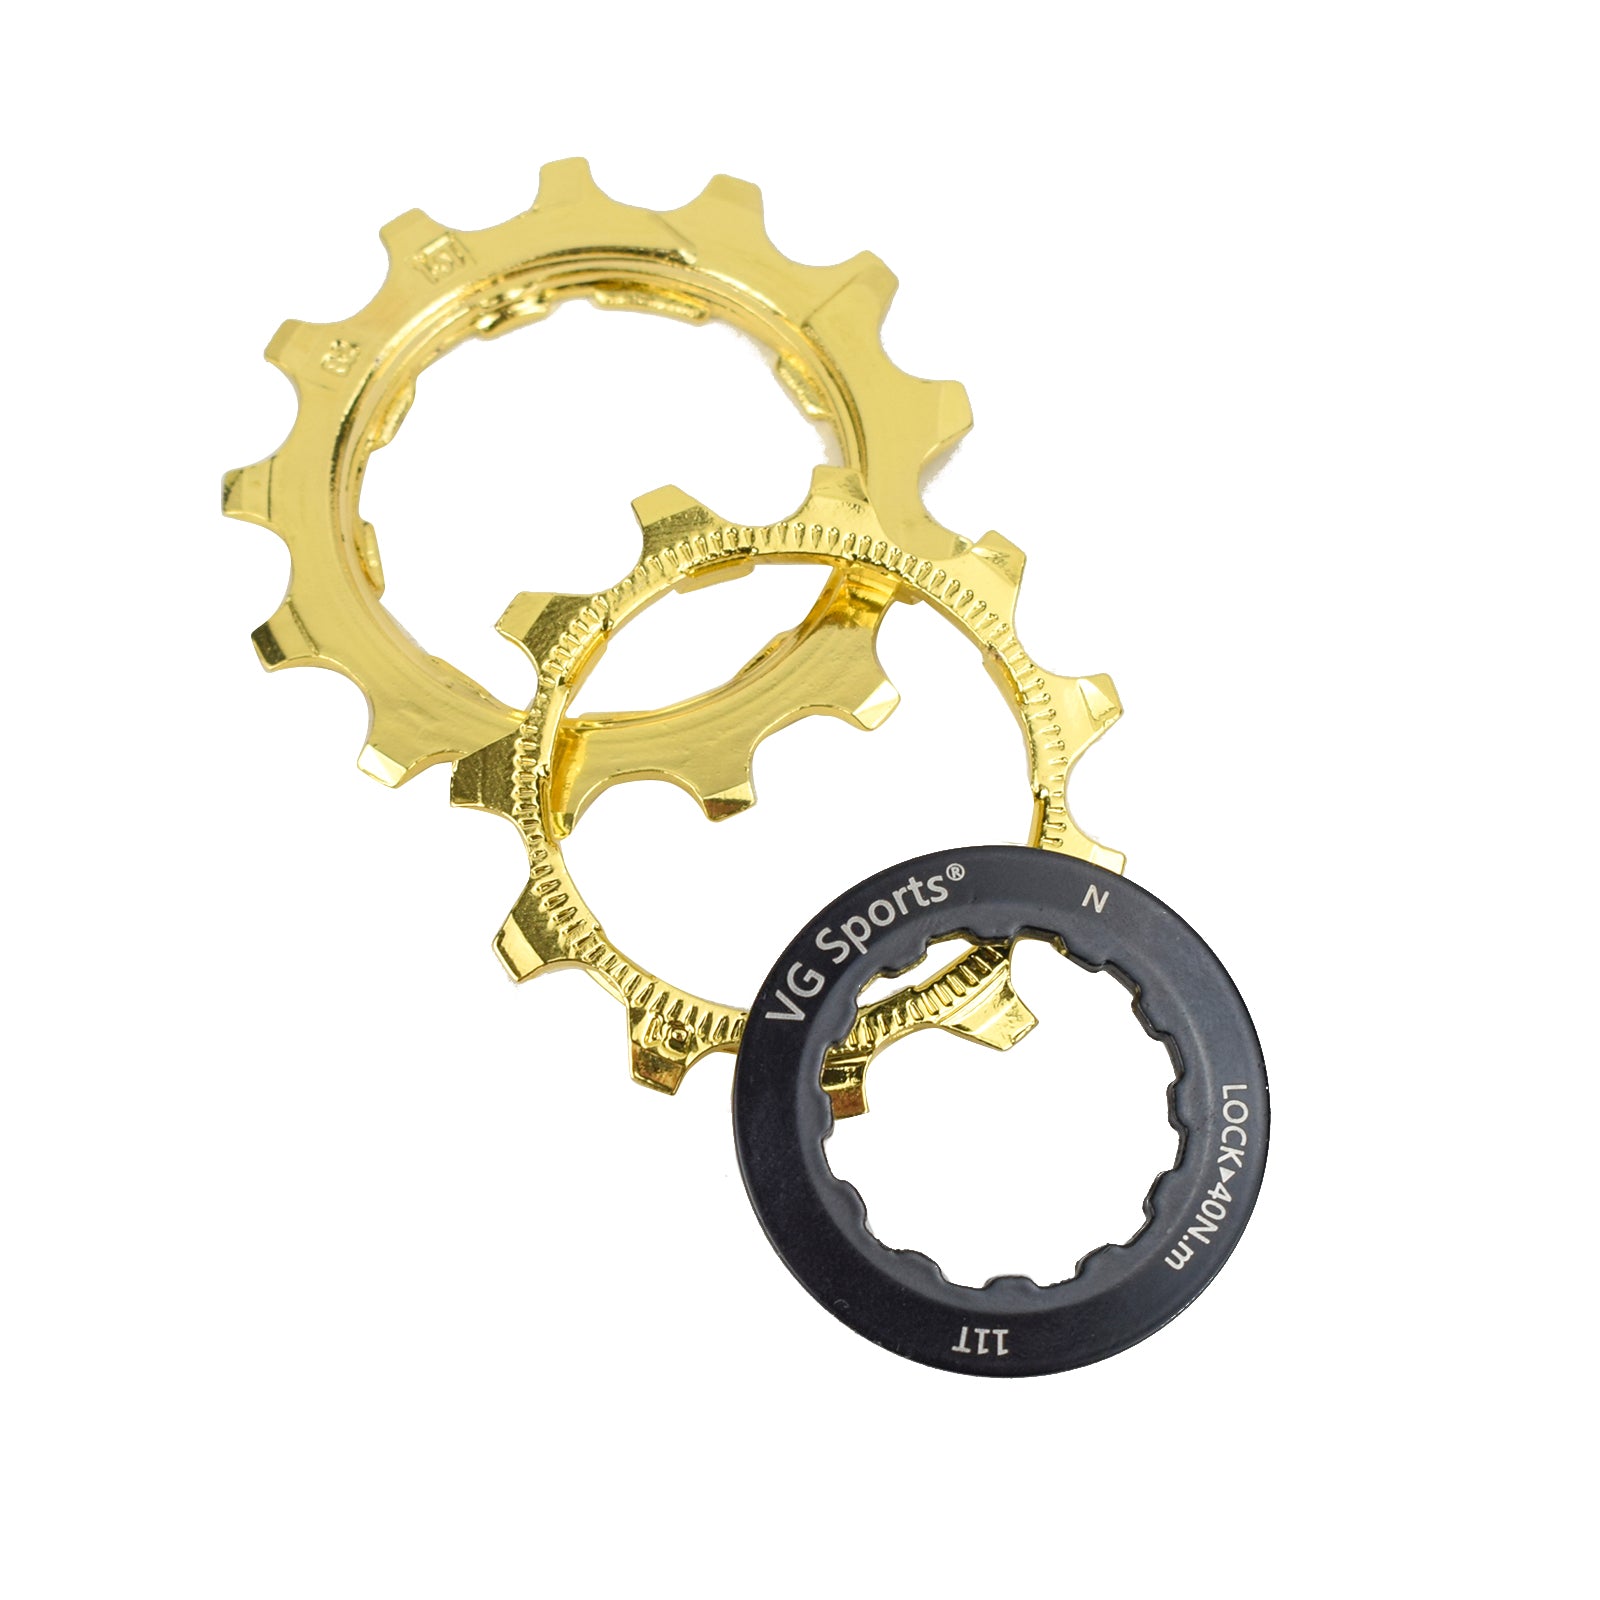 VG Sports Black&Gold 8/9/10/11/12 Speed Aluminum Bicycle Cassette